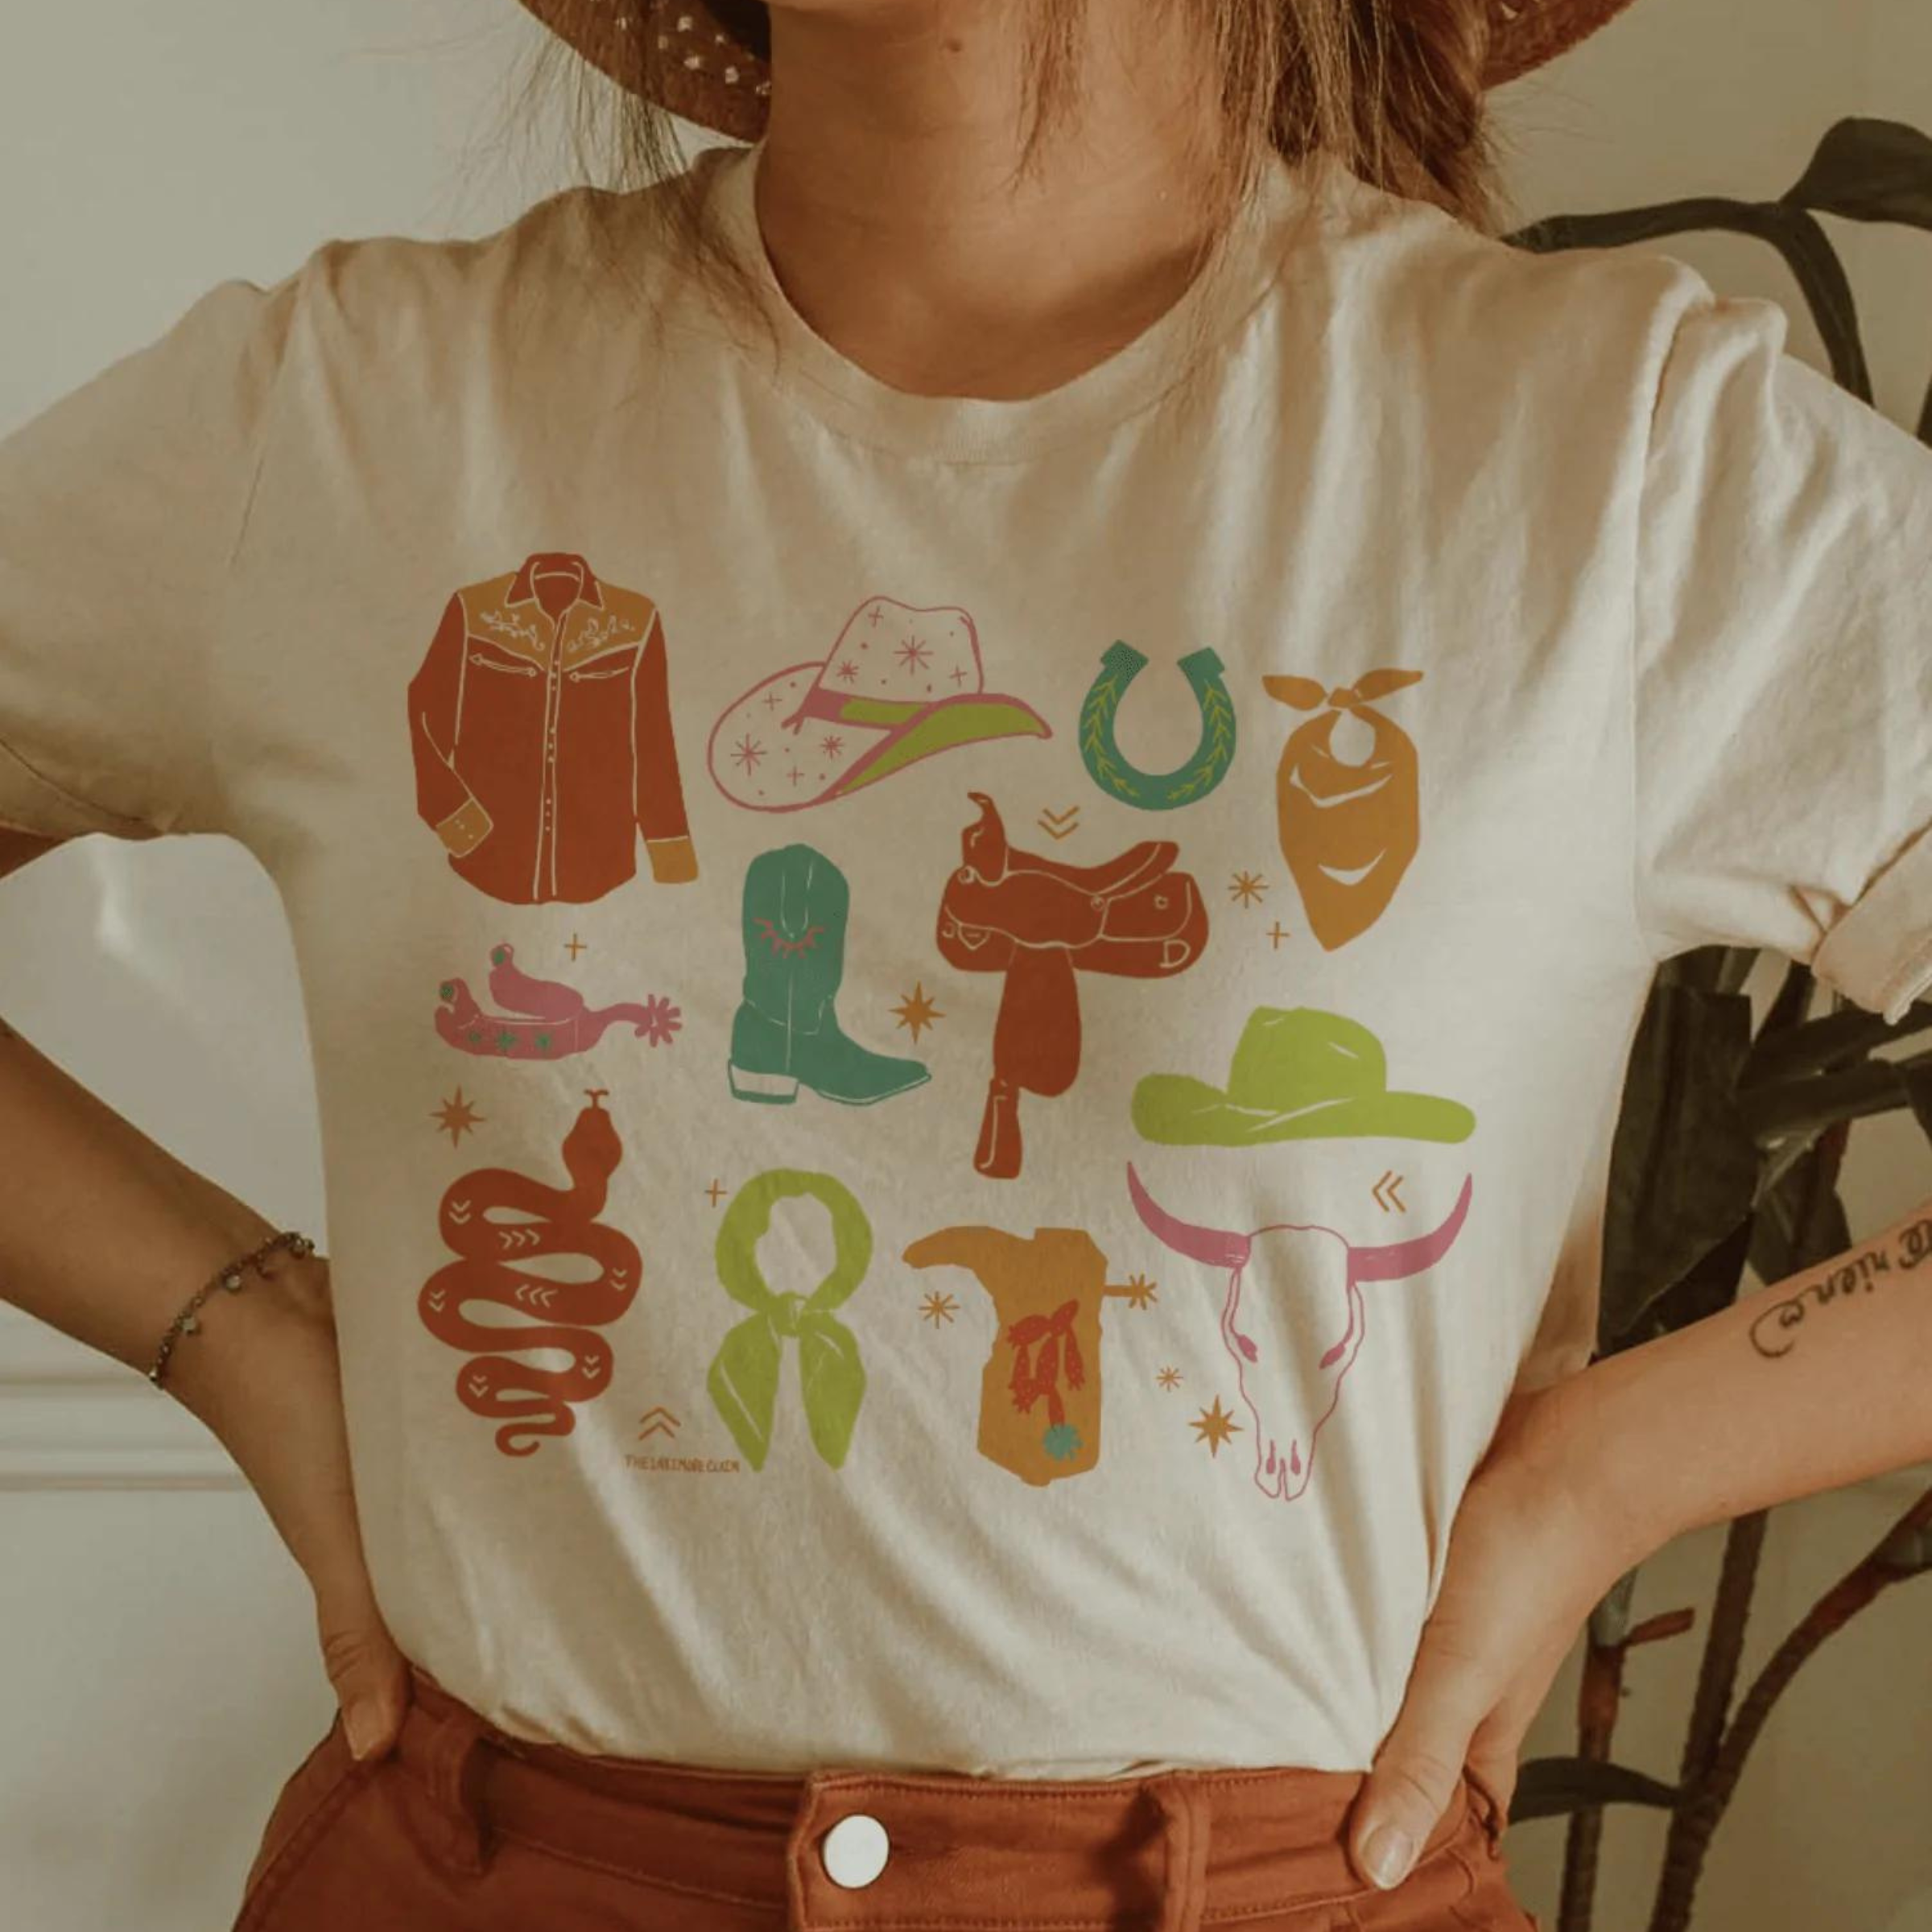 This cream, hand-drawn graphic tee has a variety of cowgirl necessities and western finds. Items include a cowboy hat, a snake, a wild rag, and many more in various pops of colors. This is a Bella + Canvas tee with short sleeves and a crew neckline. It is shown here styled with rust denim jeans, a straw hat, and a silver bracelet.